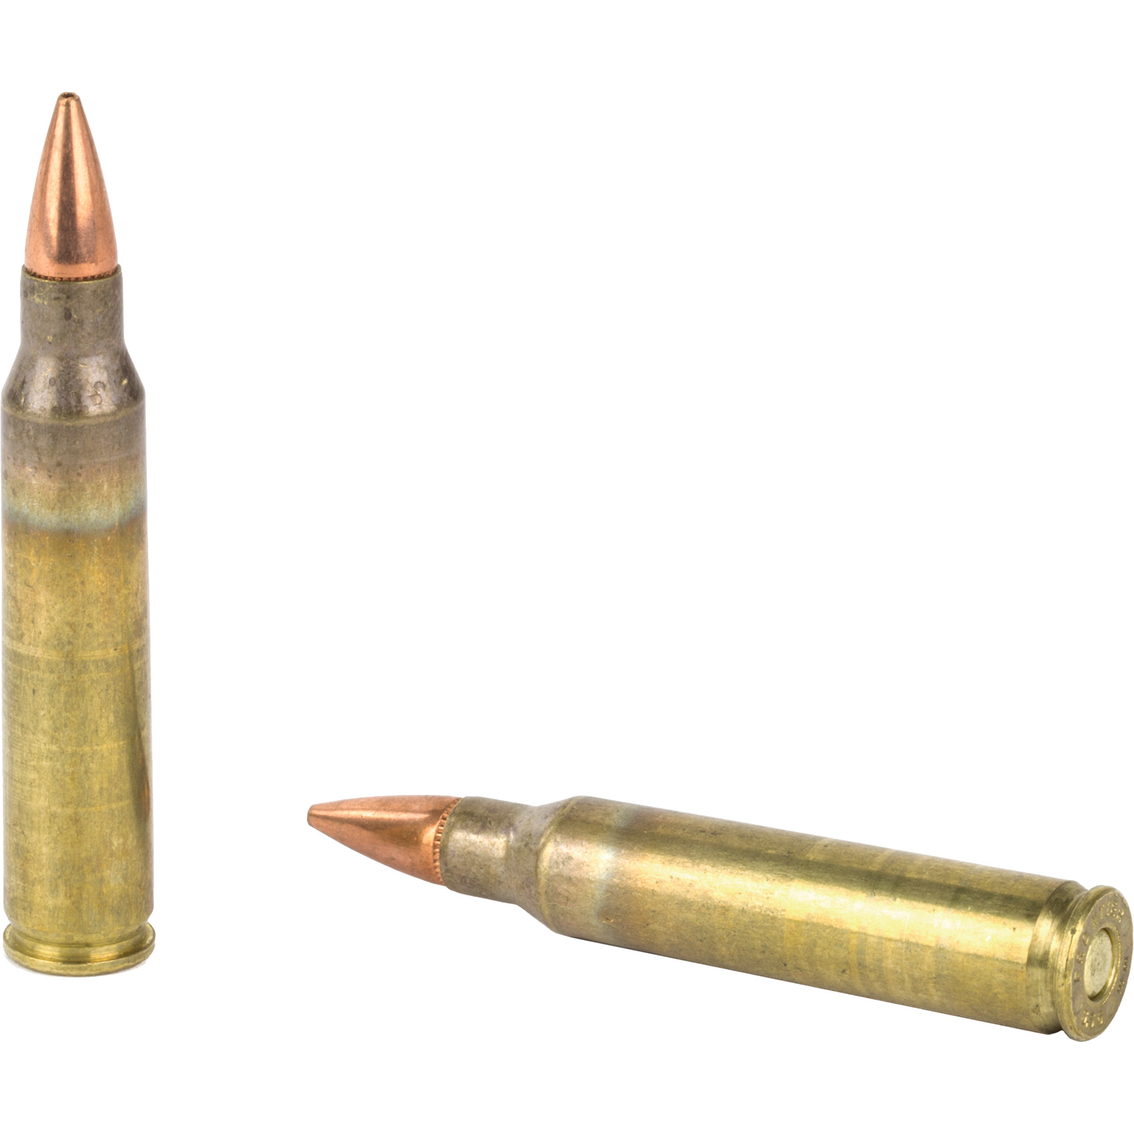 Frontier 5.56 NATO 55 Gr. HP Match, 20 Rnd - Image 4 of 4